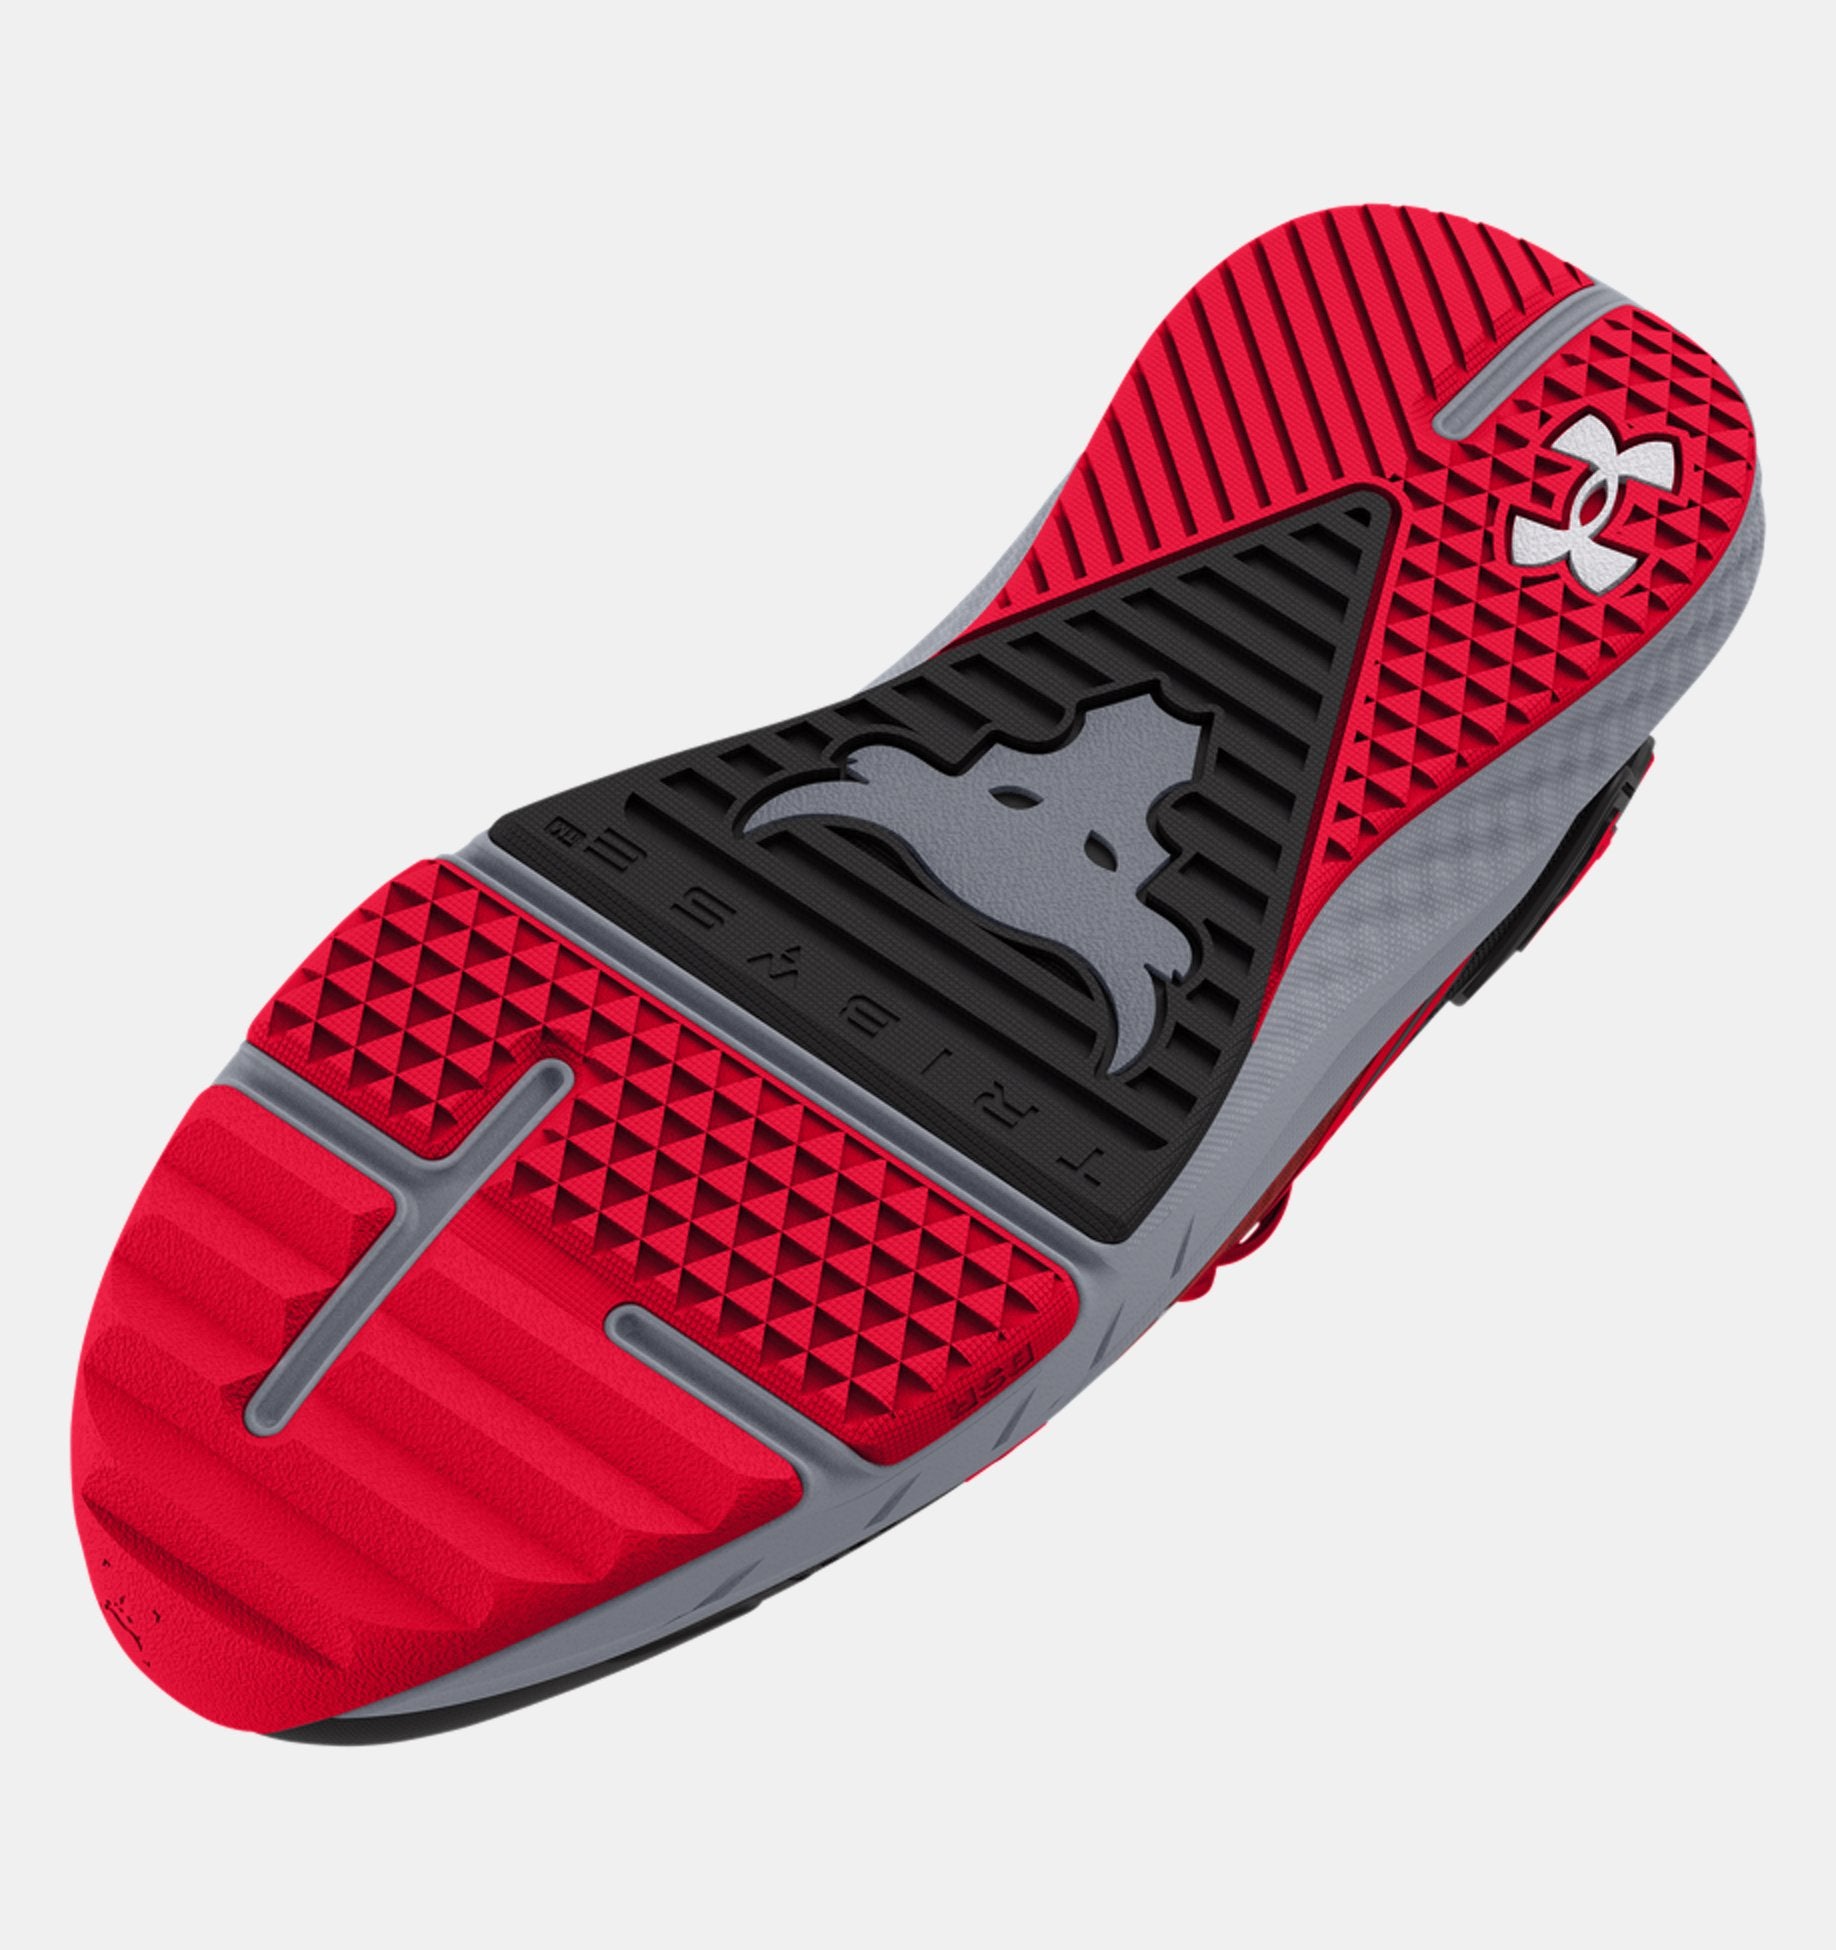 REVIEW #408: UNDER ARMOUR PROJECT ROCK BSR 3 #underarmour #projectroc